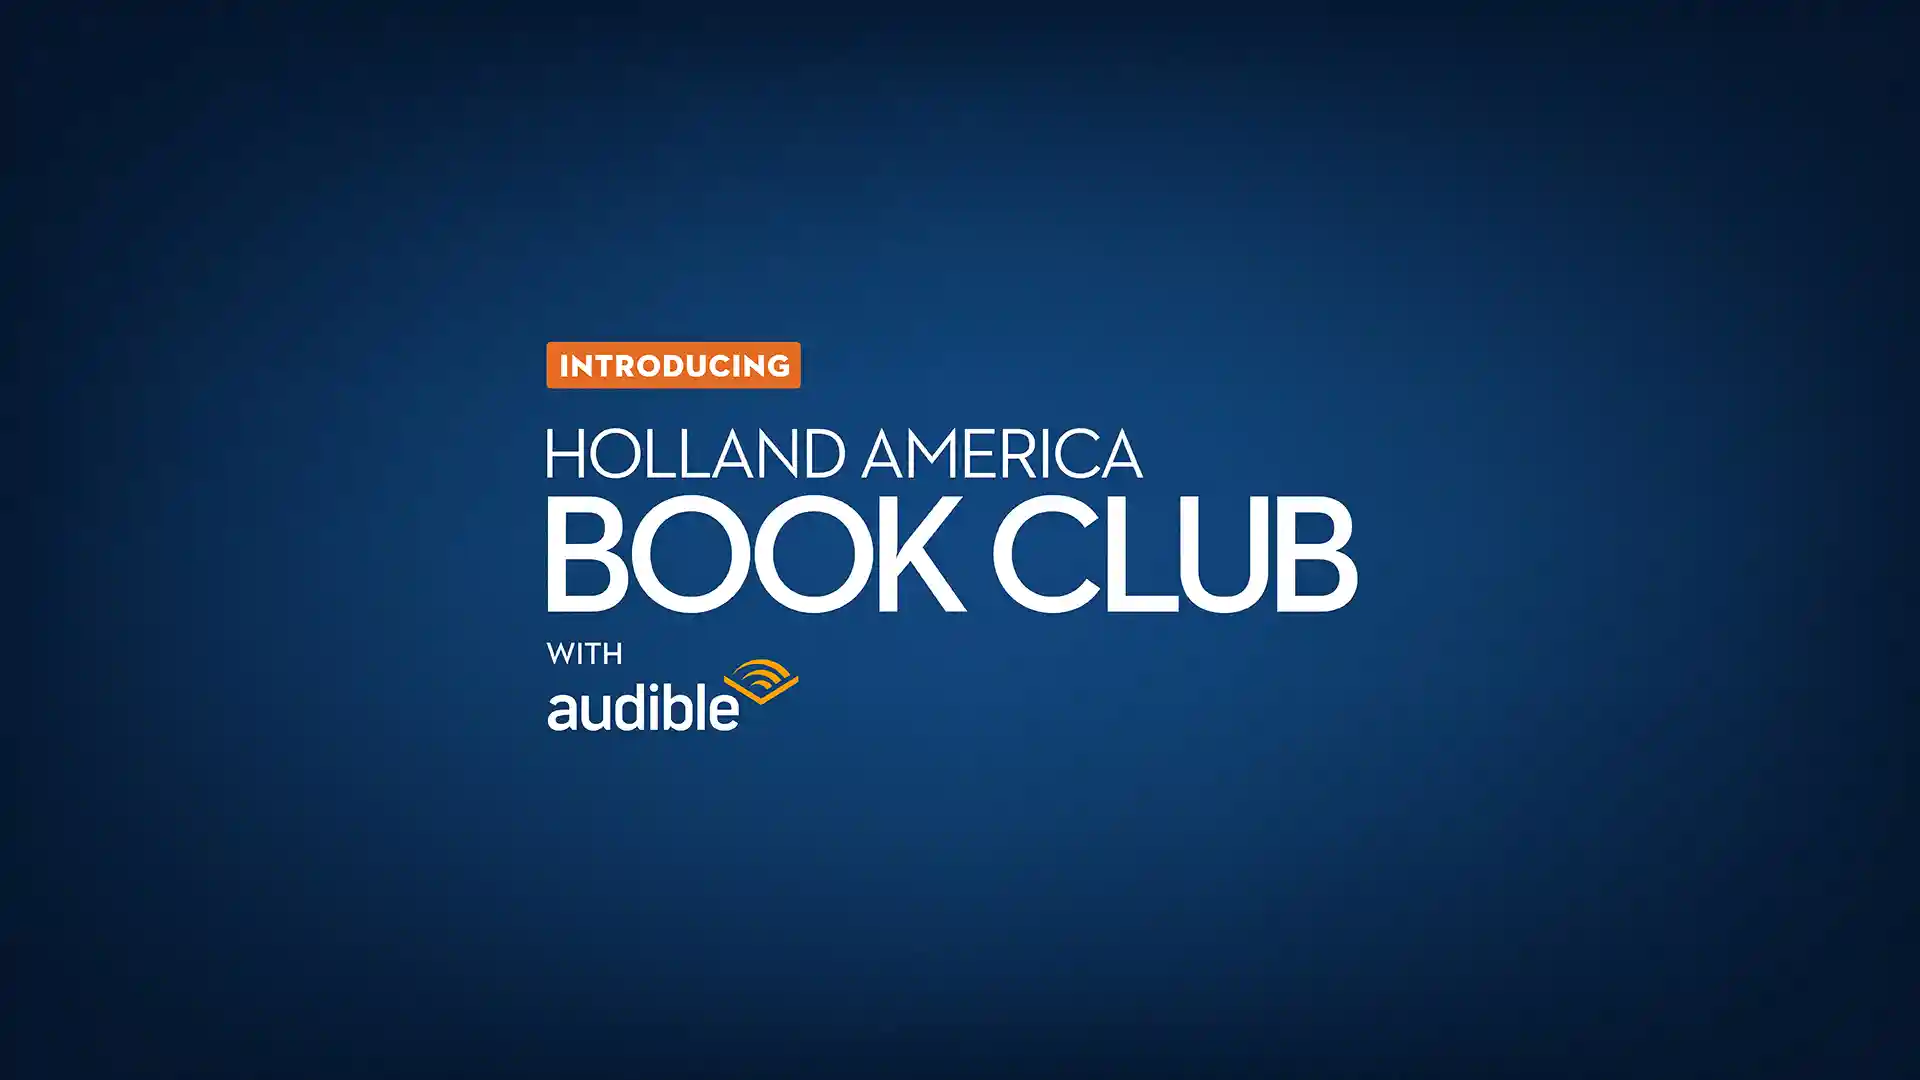 Post: We’re Teaming Up with Audible on Our New Book Club